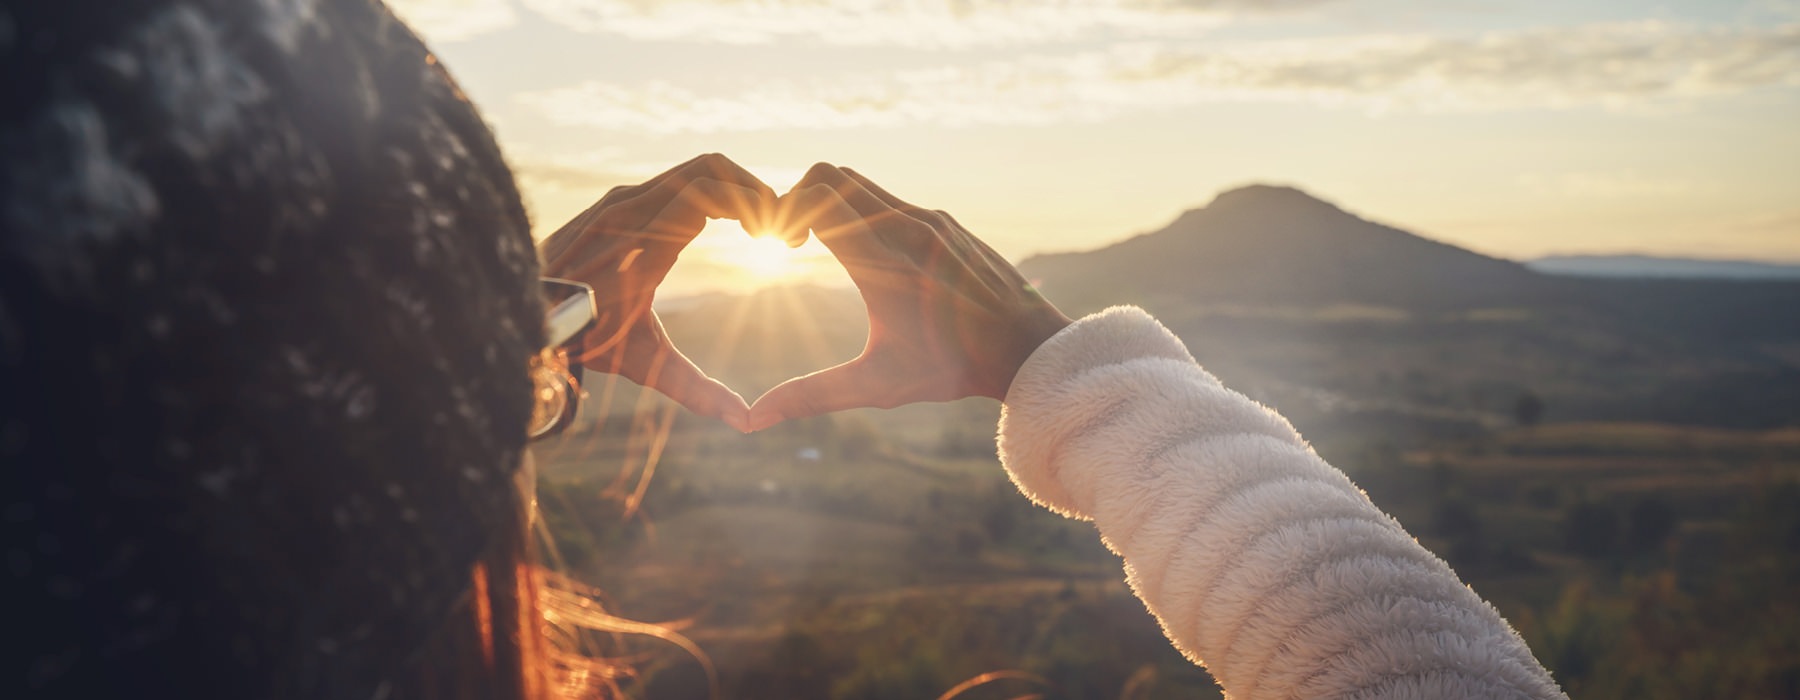 woman makes a heart shape around sunrise over mountains with her hands